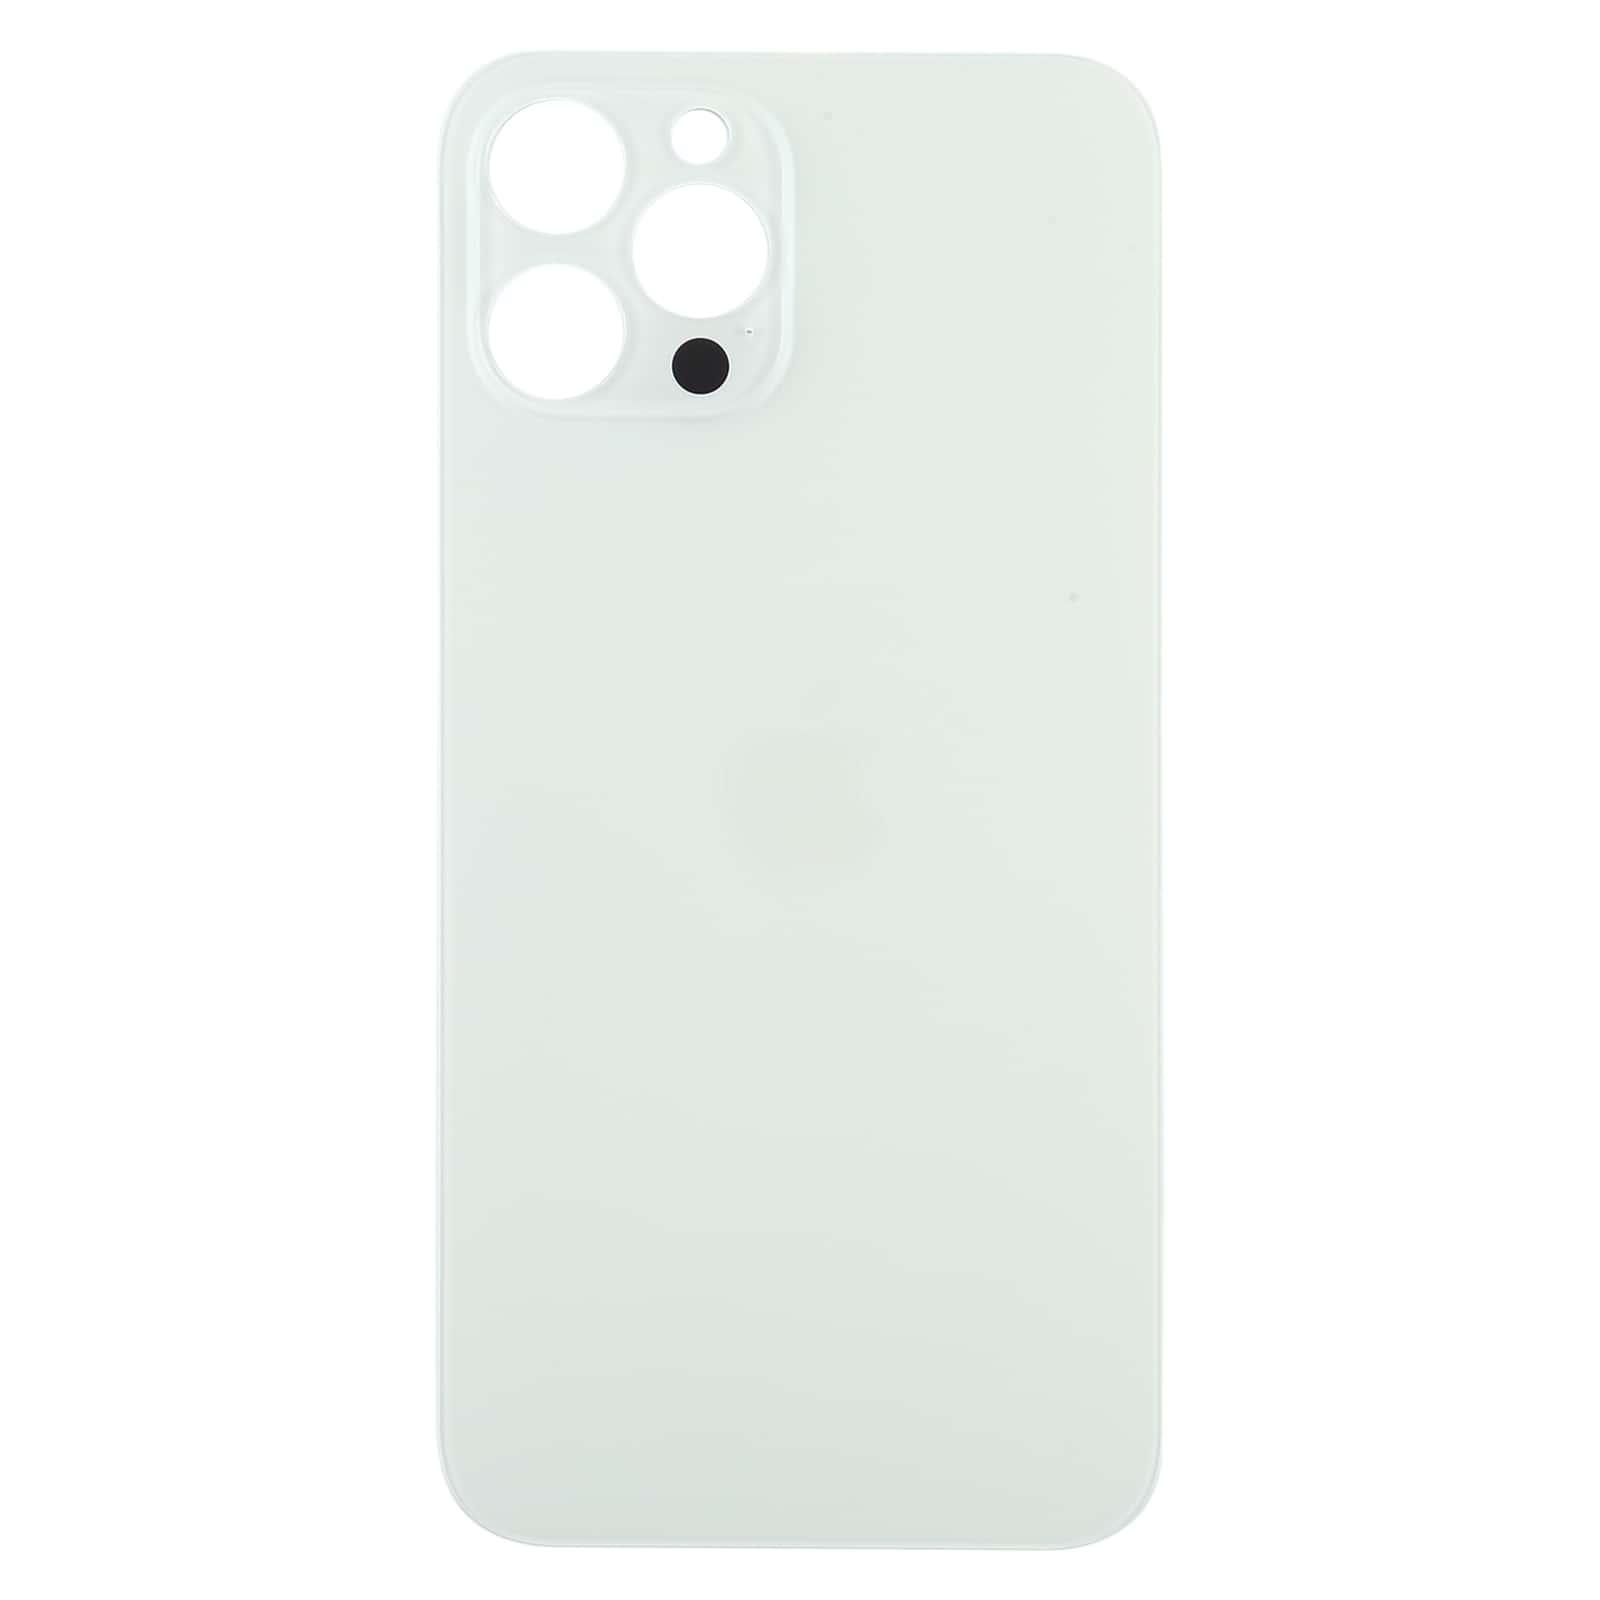 Back Glass Panel for iPhone 12 Pro Max White Big Camera Hole